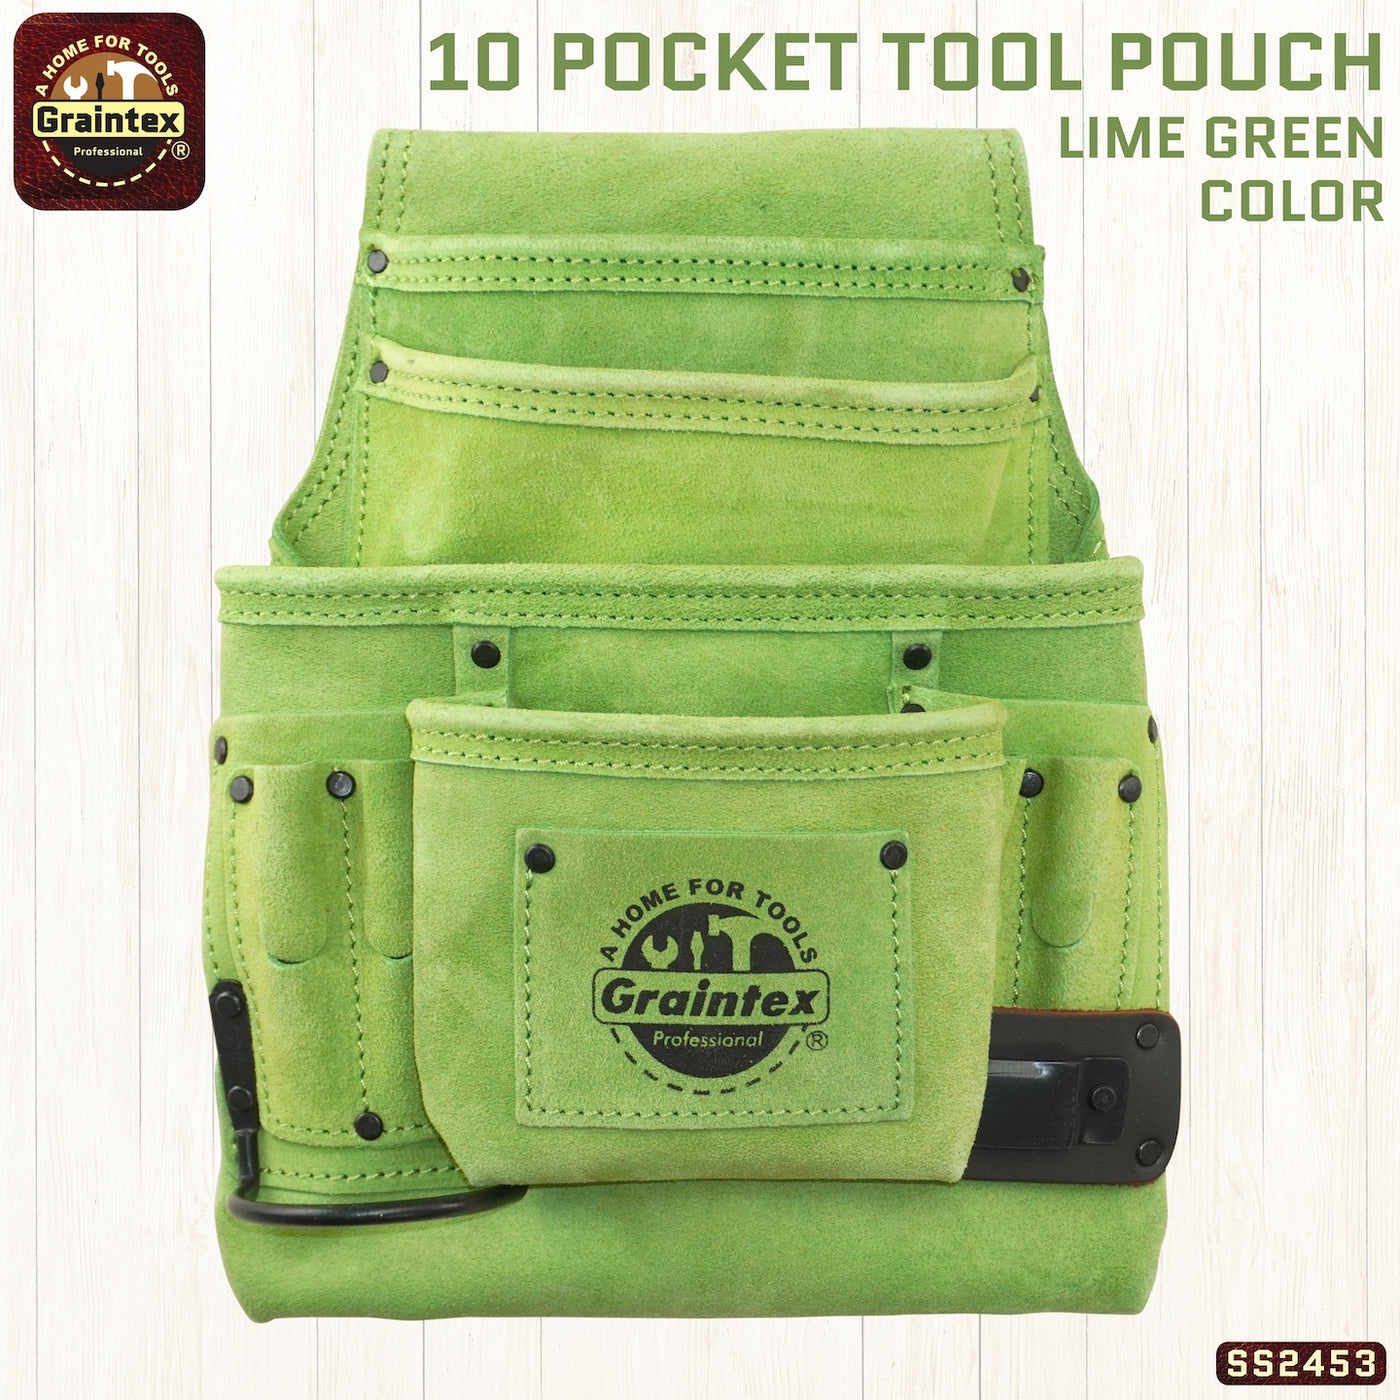 SS2453 :: 10 Pocket Nail & Tool Pouch Lime Green Color Suede Leather